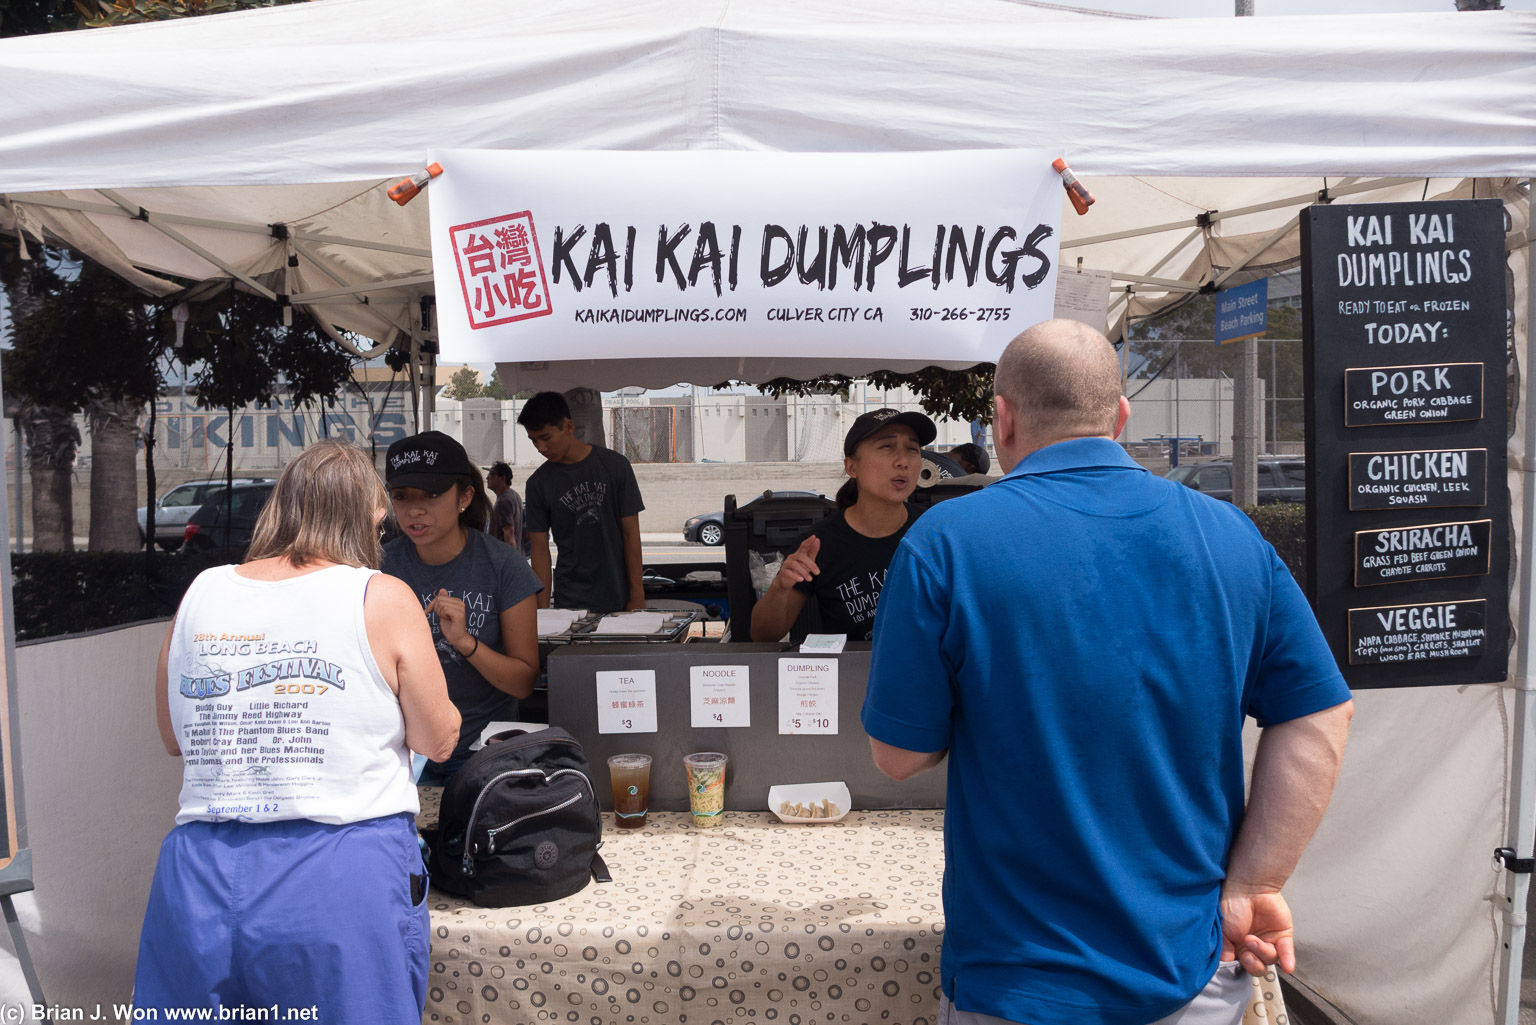 Kai Kai Dumplings. Couldn't find them on Yelp.